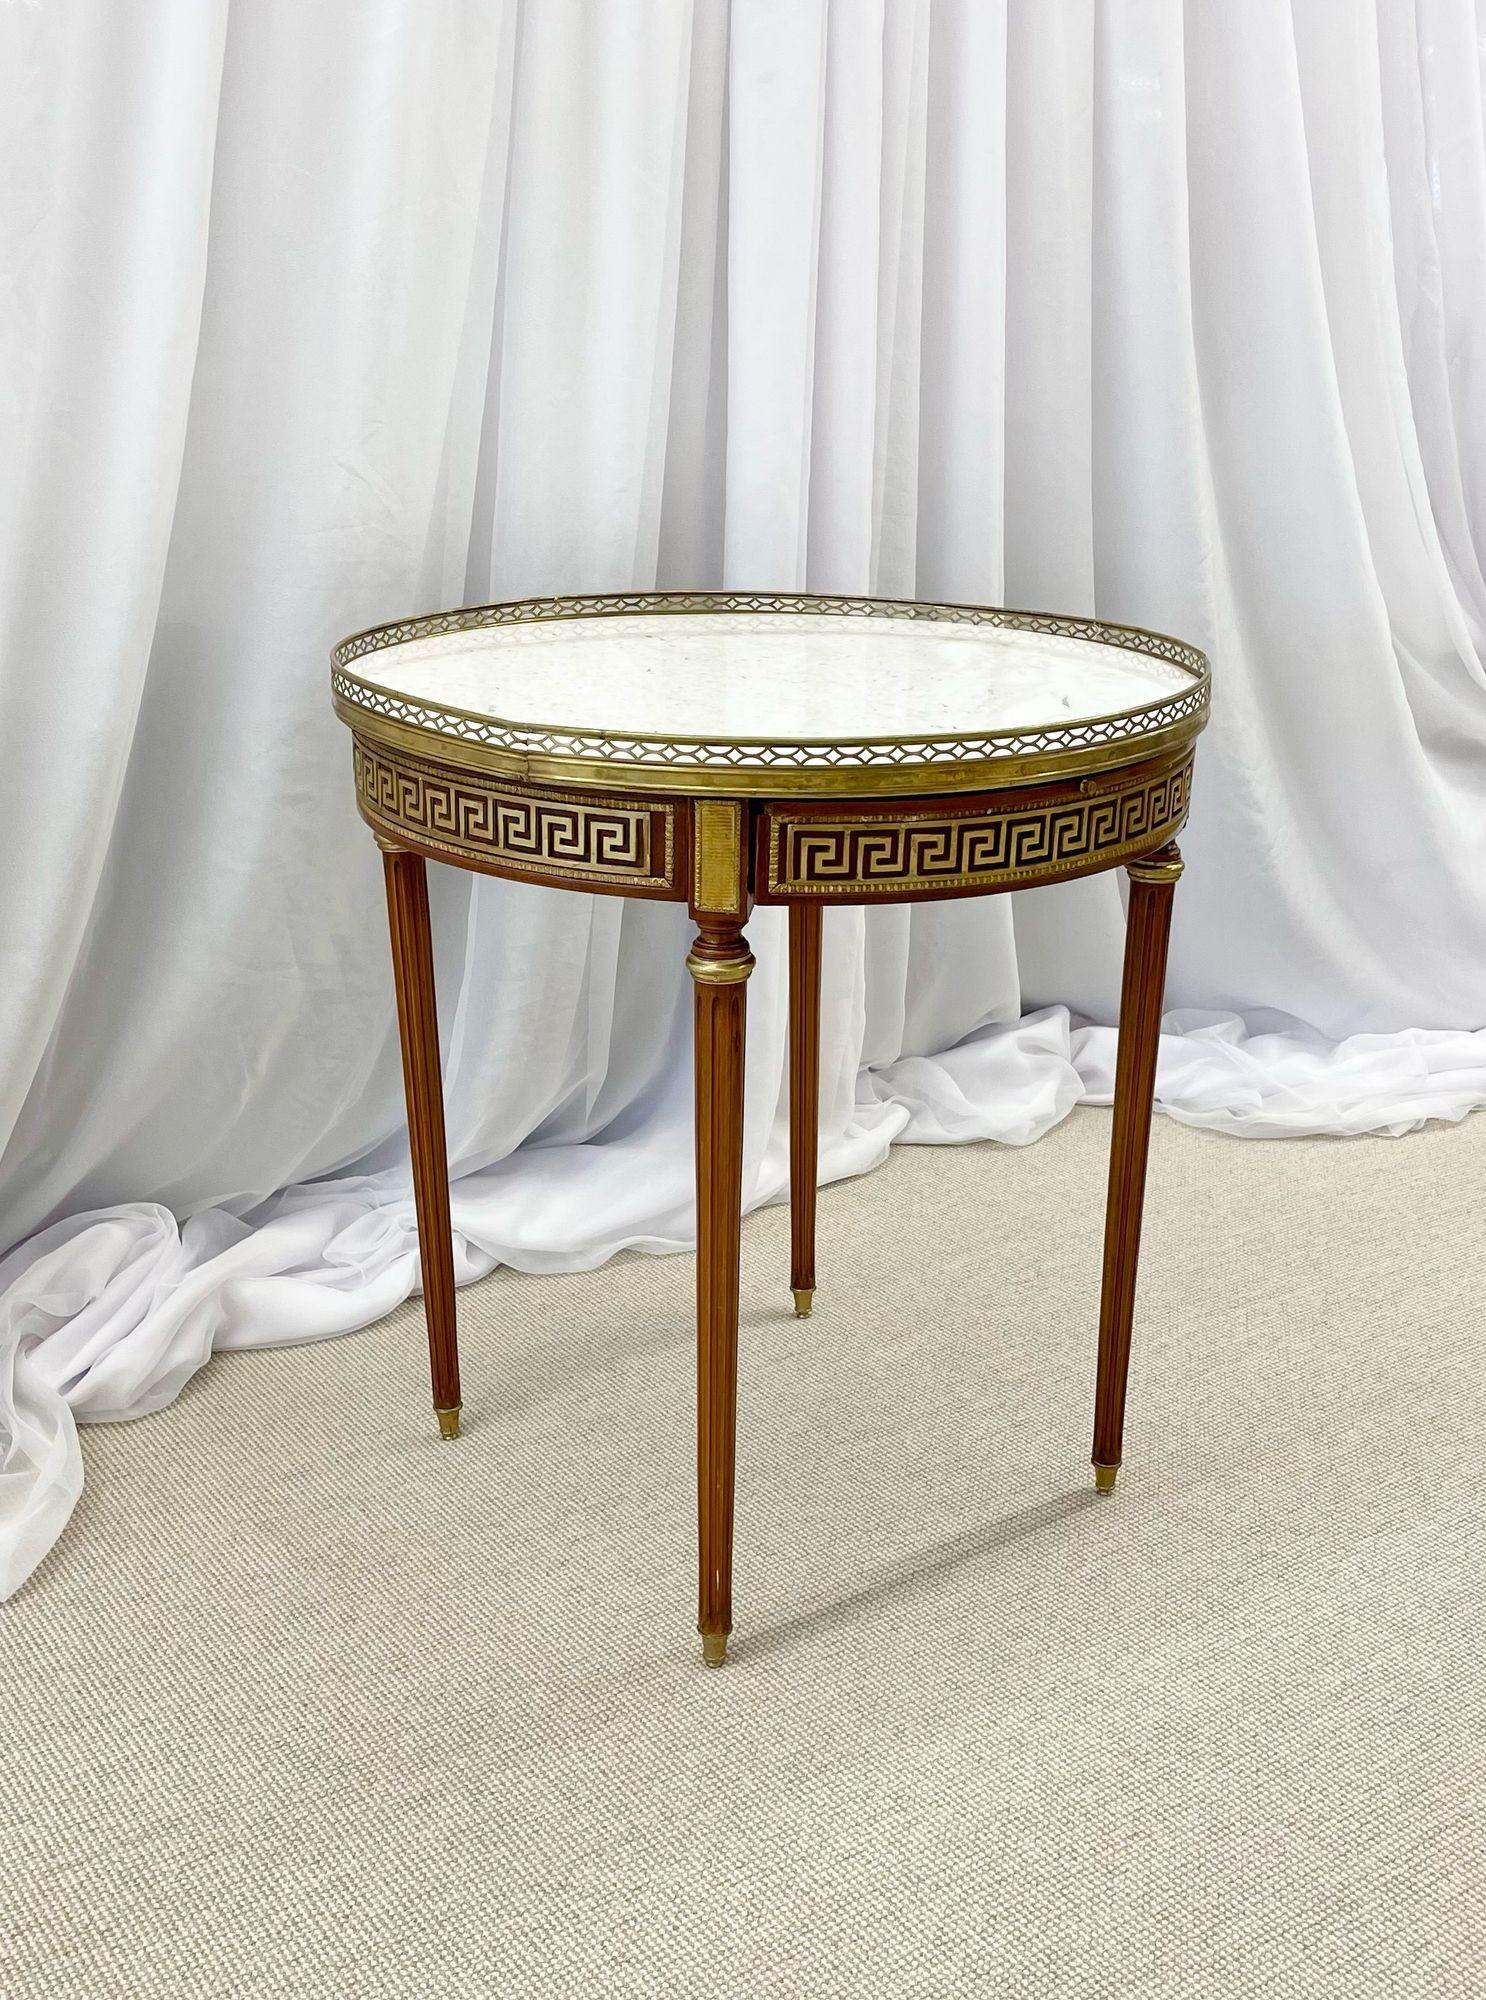 Single Marble Top Greek Key Bouillotte or End Table, Manner of Maison Jansen
A marble top Greek Key Bouillotte or end table. Manner of Jansen in mahogany with double drawers and pull-out slides. Each bronze sabot leading to a group of tapering legs